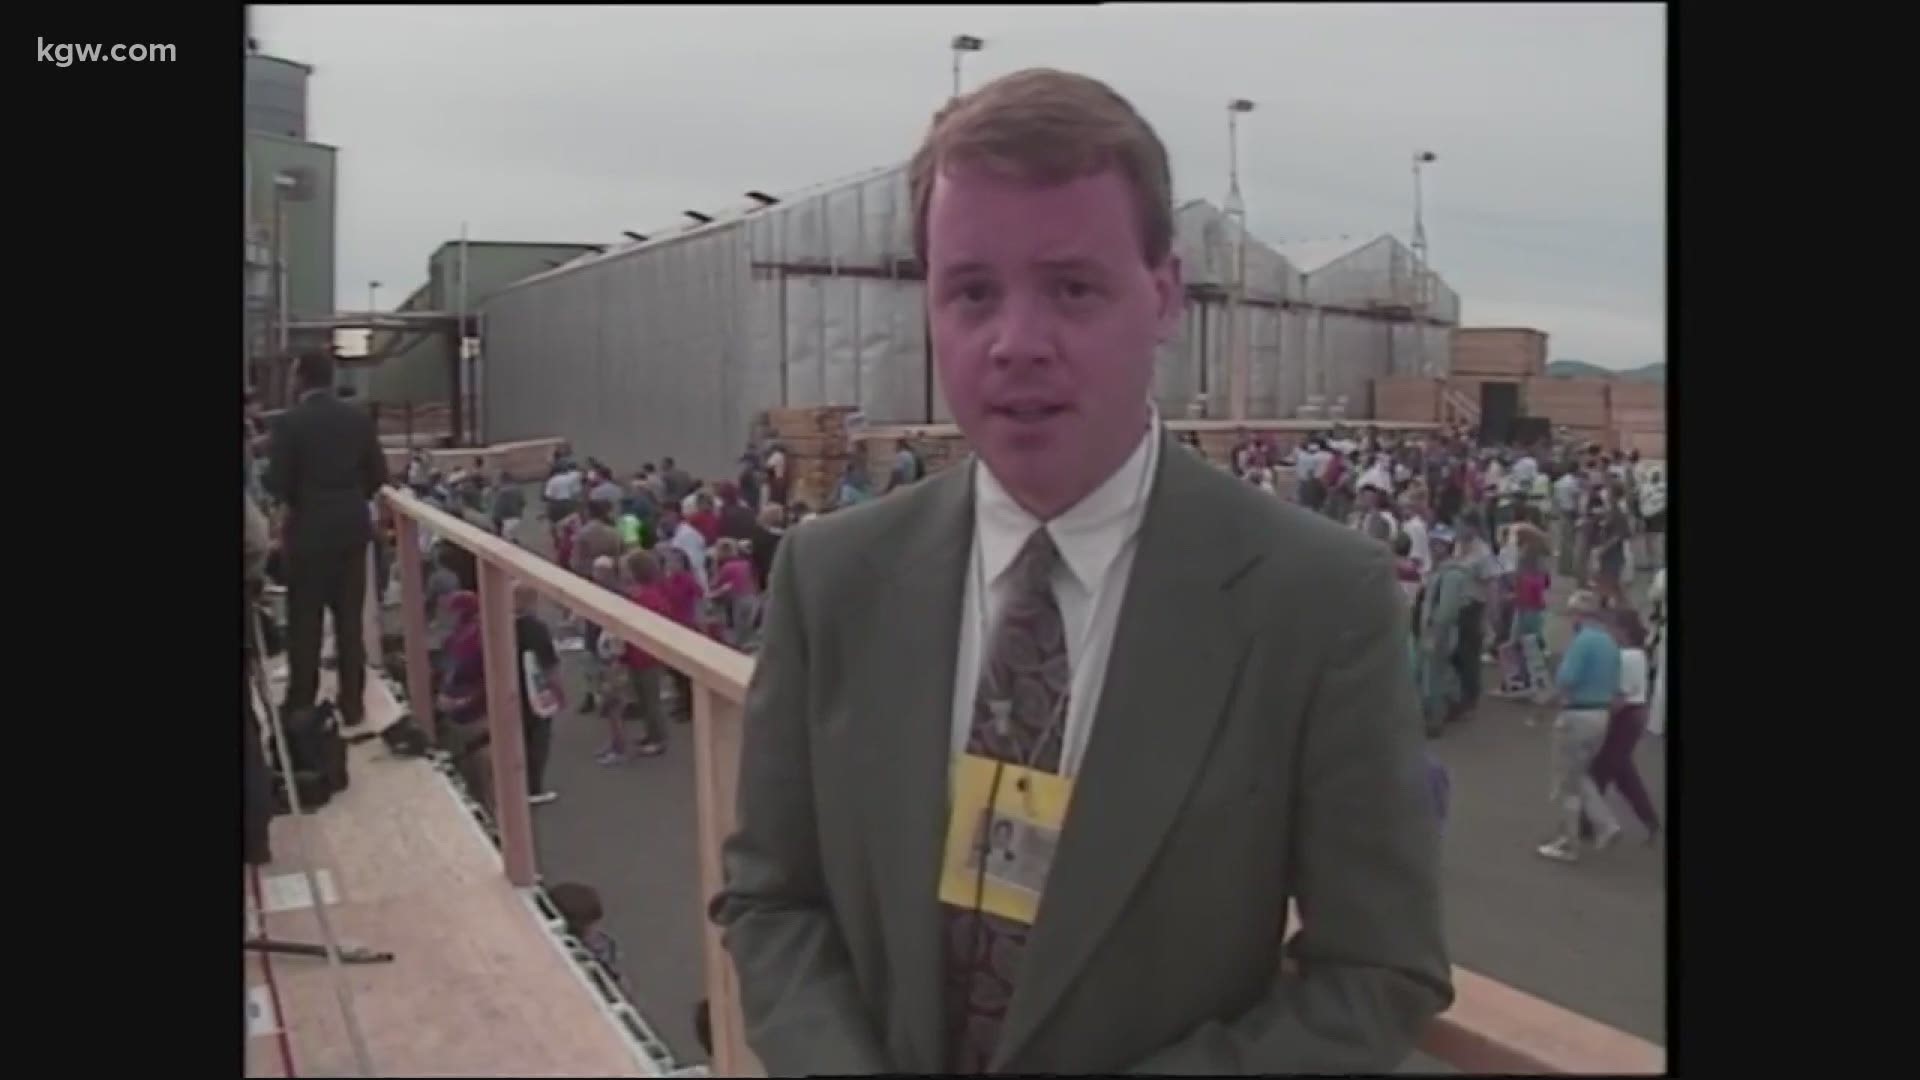 Let’s look back on the past 30 years of reporting and anchoring from Pat Dooris.